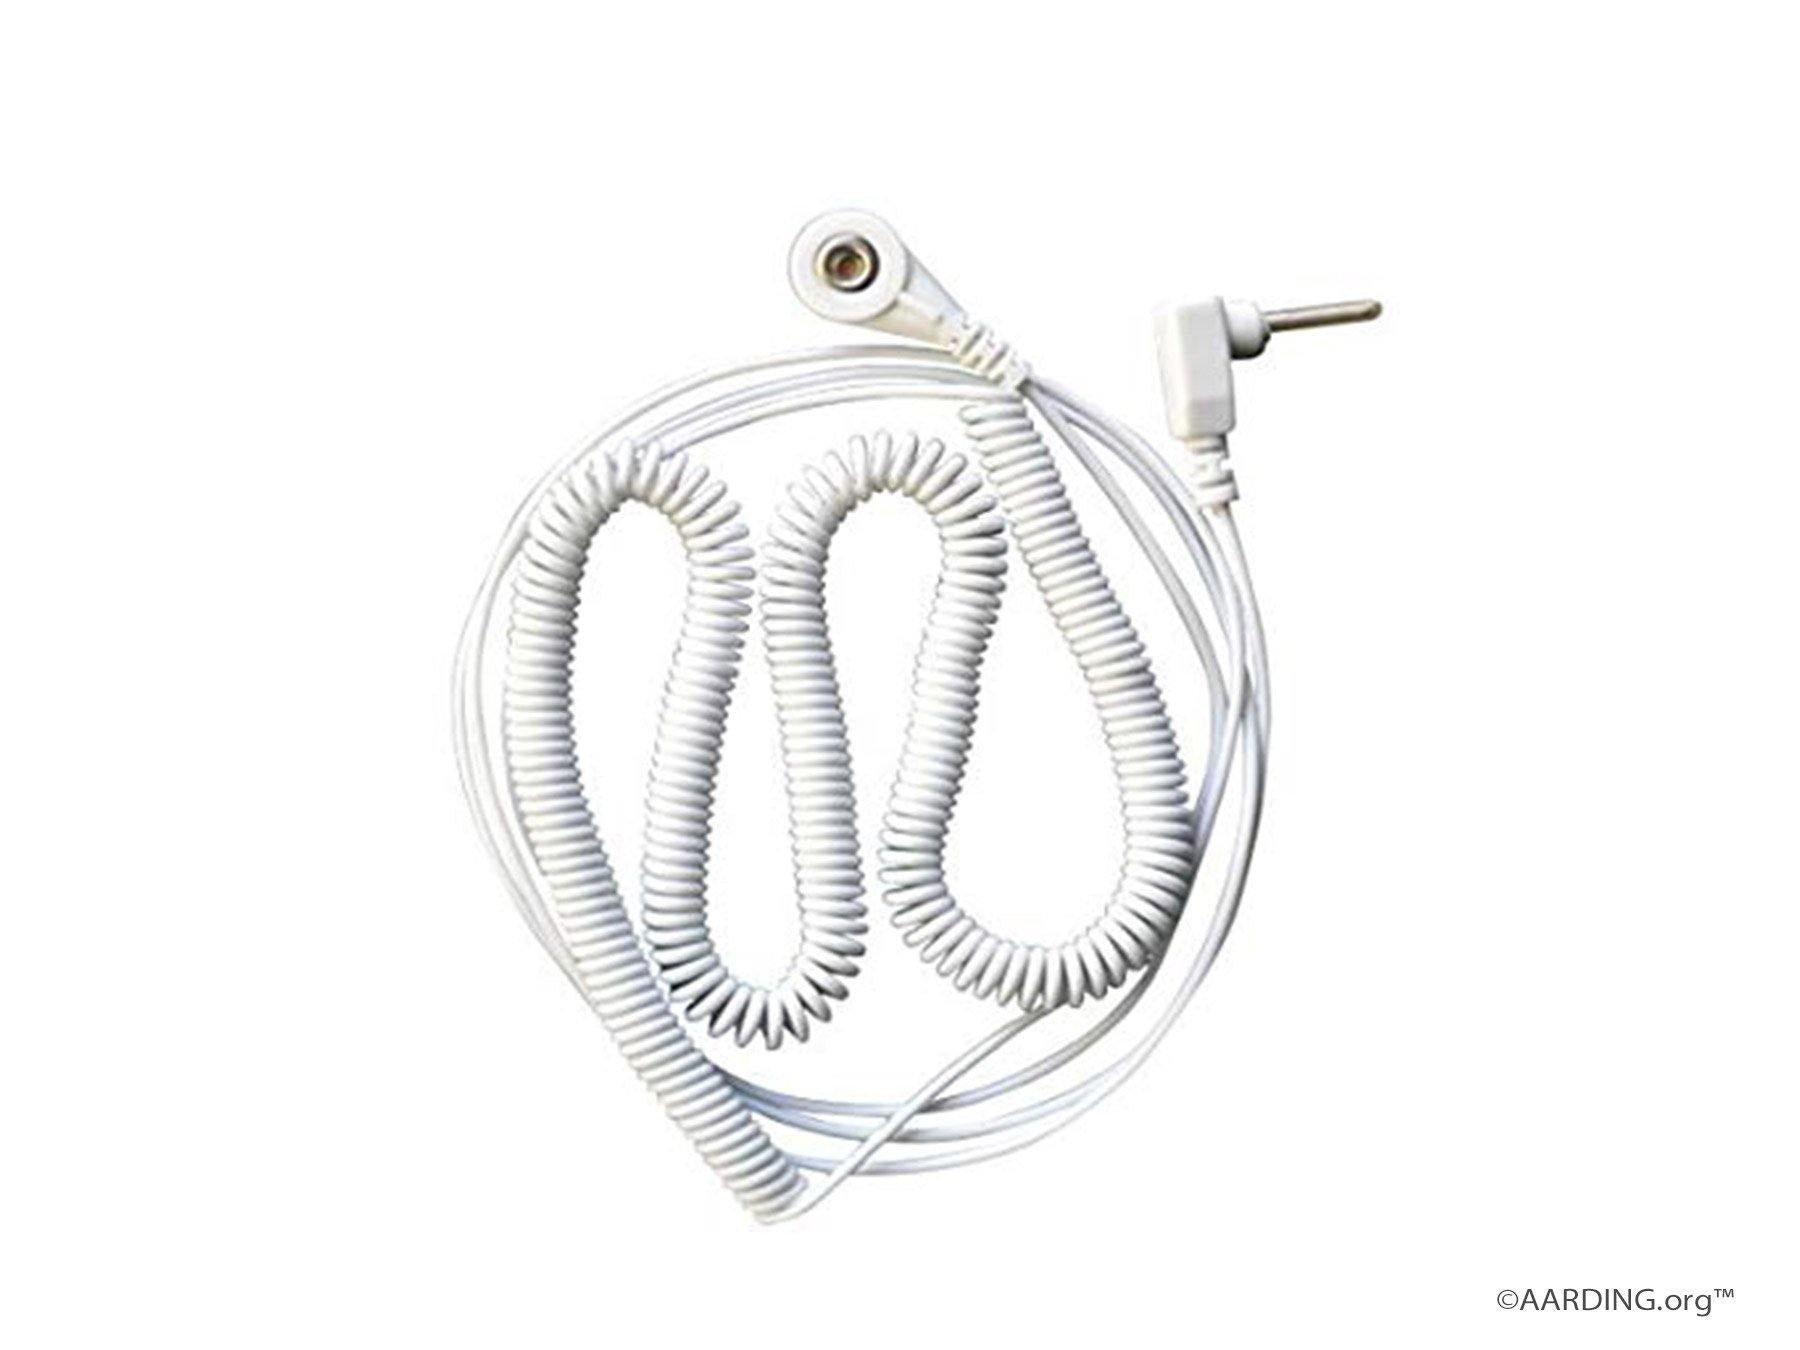 Standard Coiled Connection Cable 13ft (4m) - Aarding